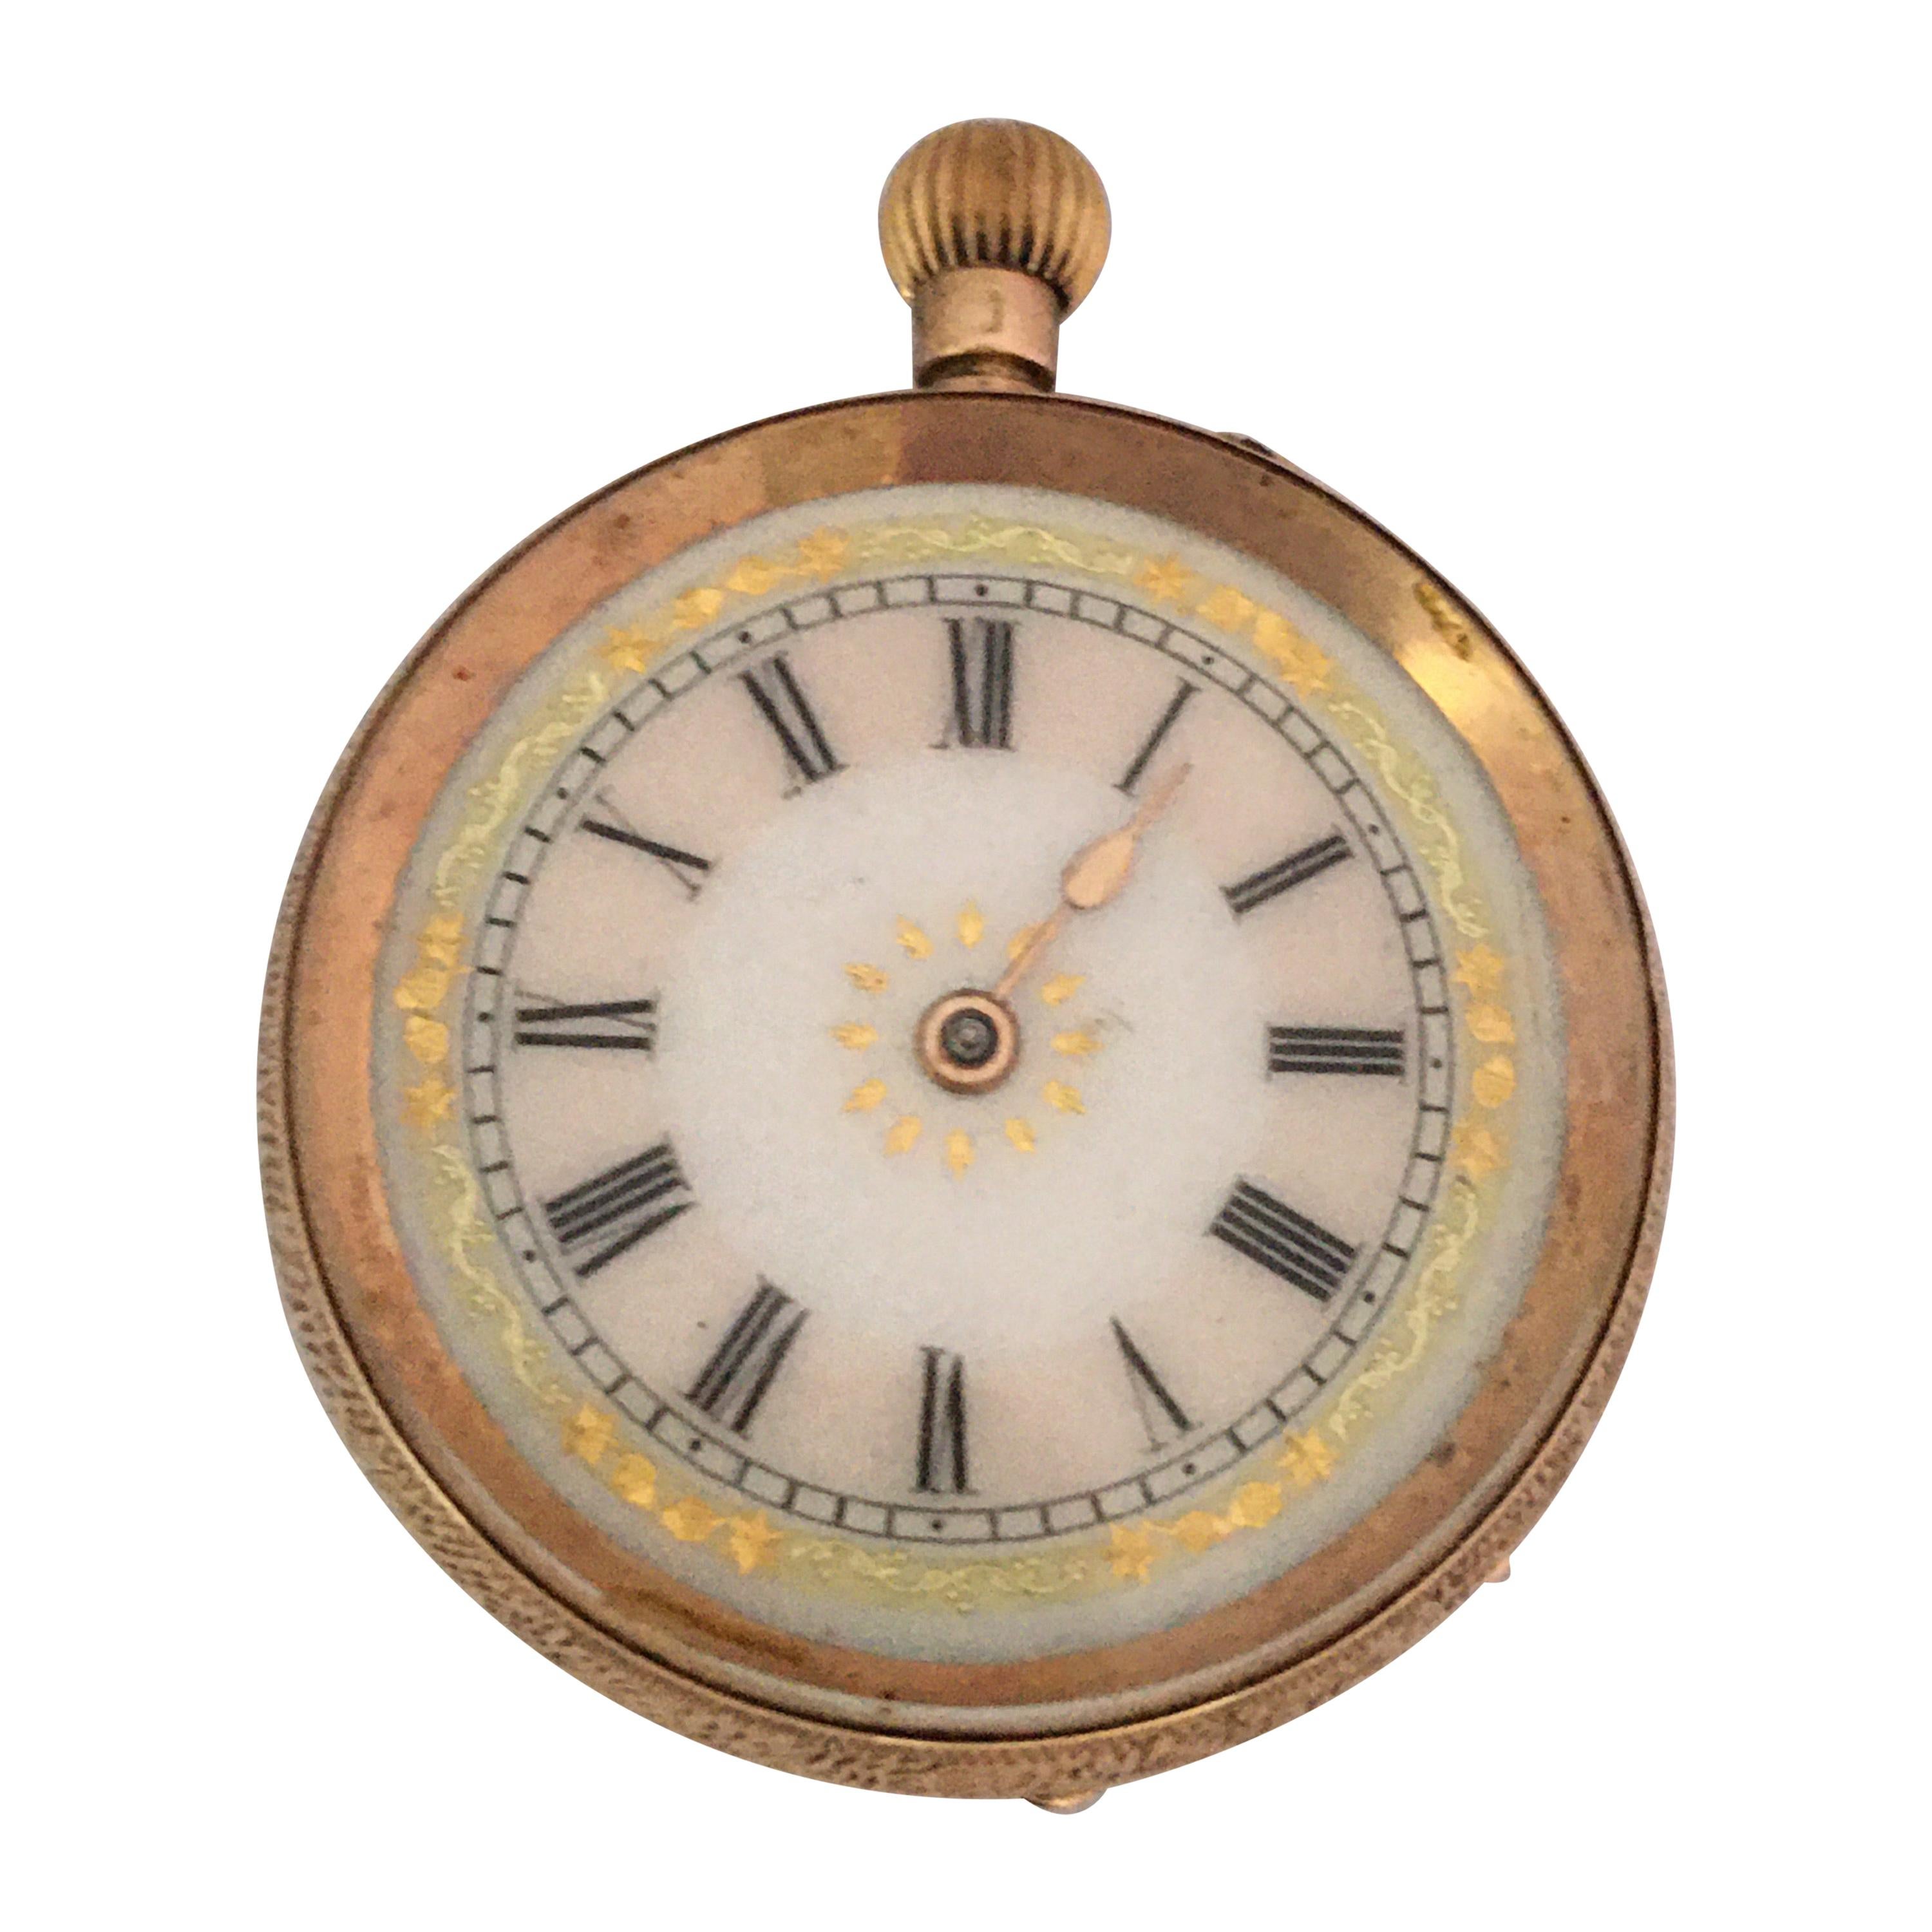 This beautiful 33mm diameter antique mechanical gold ladies watch is in good working condition and it is running well. Visible signs of ageing and wear with light marks on the glass and on the watch case as shown. The minute hand and the metal ring